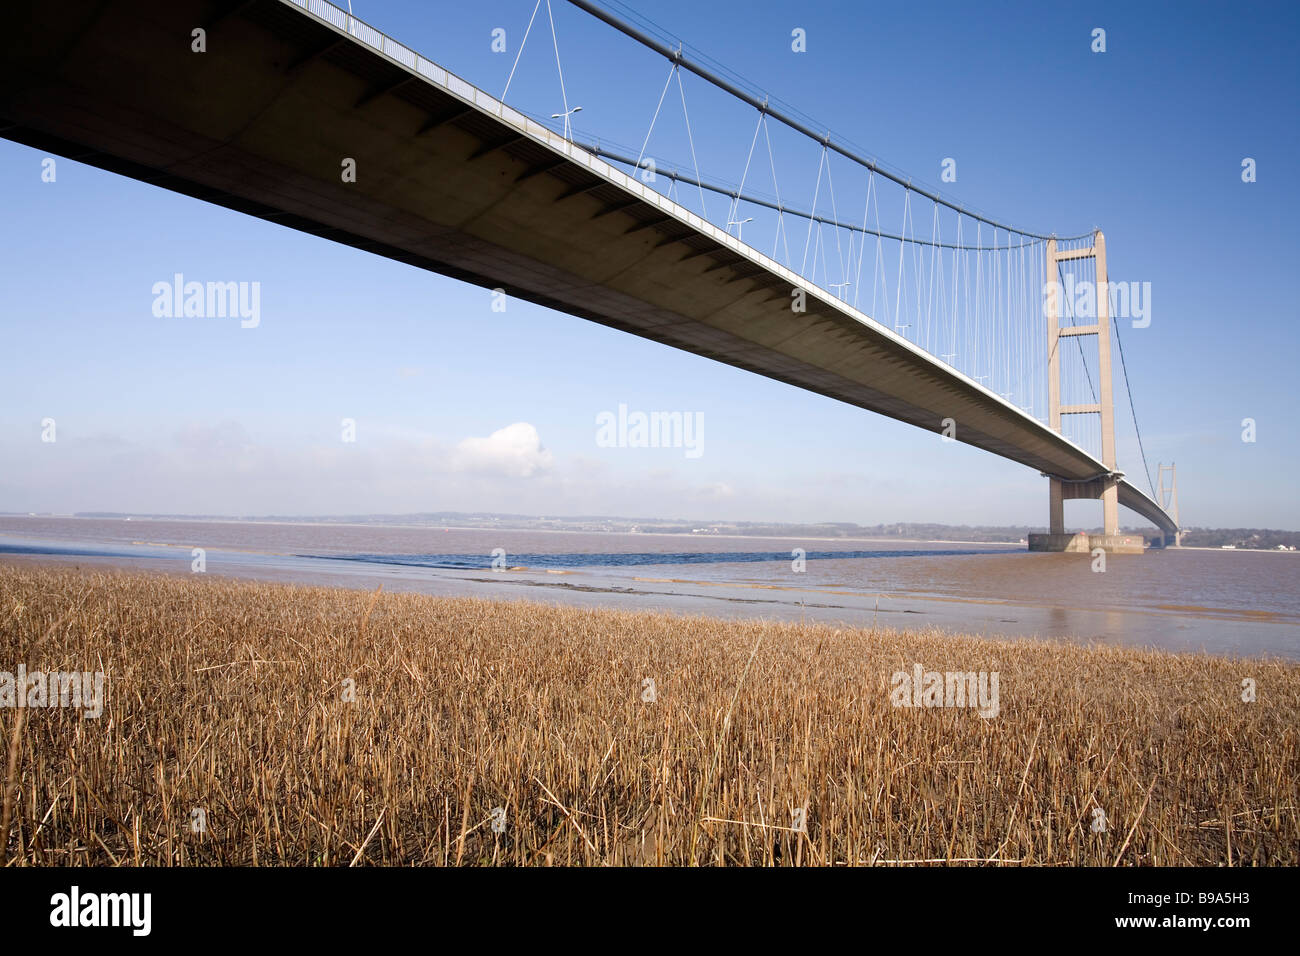 Humber Bridge crossing the river Humber between Kingston upon Hull and Barton upon Humber. Seen from the south. Stock Photo